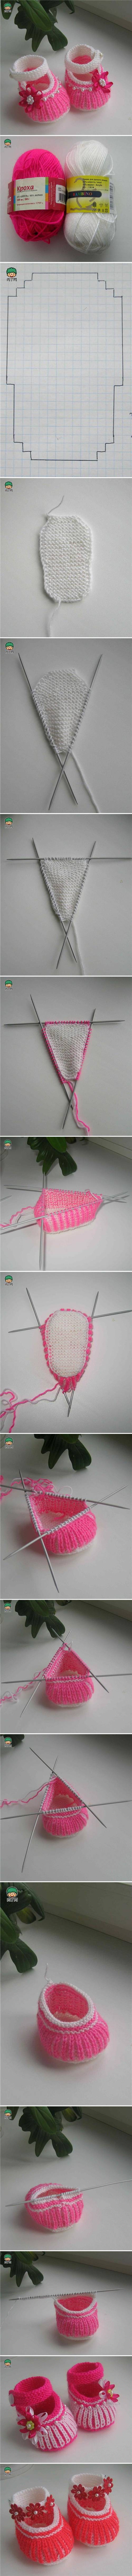 DIY Cute Knit Baby Shoes